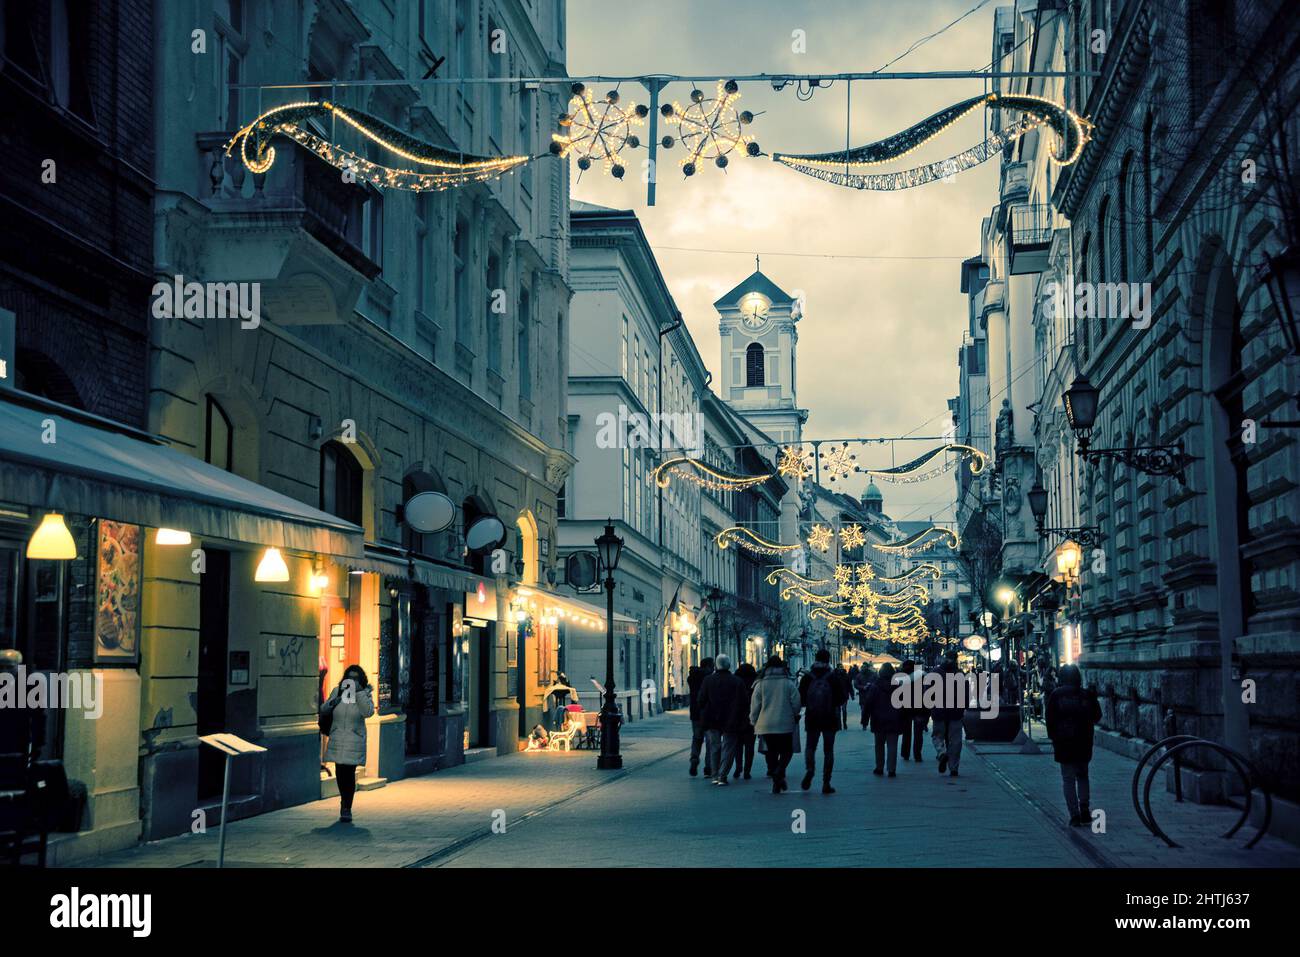 Gloomy night view of Váci street in Budapest at Christmas Eve Stock Photo